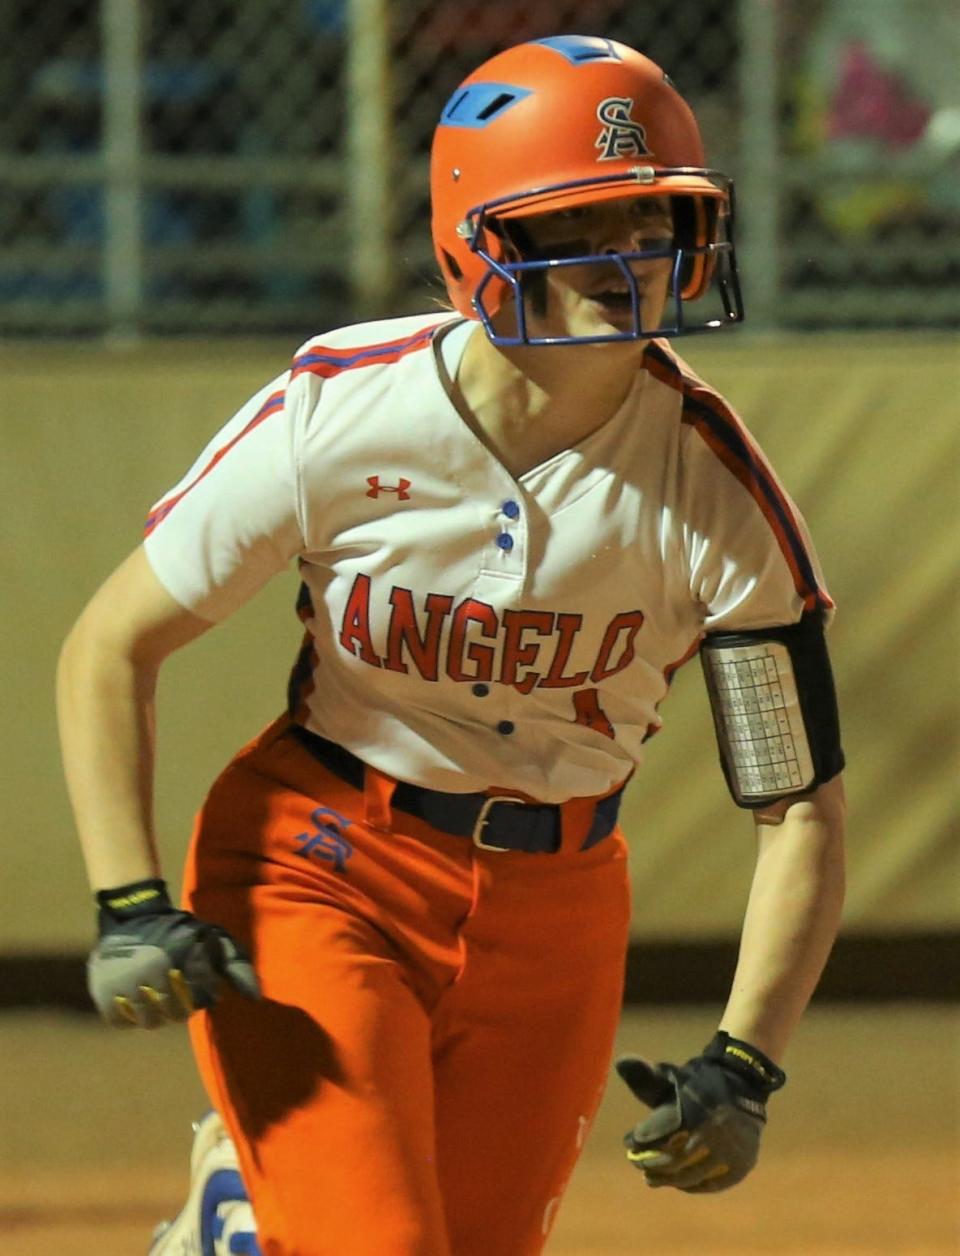 San Angelo Central High School shortstop Taylor Martin runs to first base after connecting on a pitch during the 2021 season.